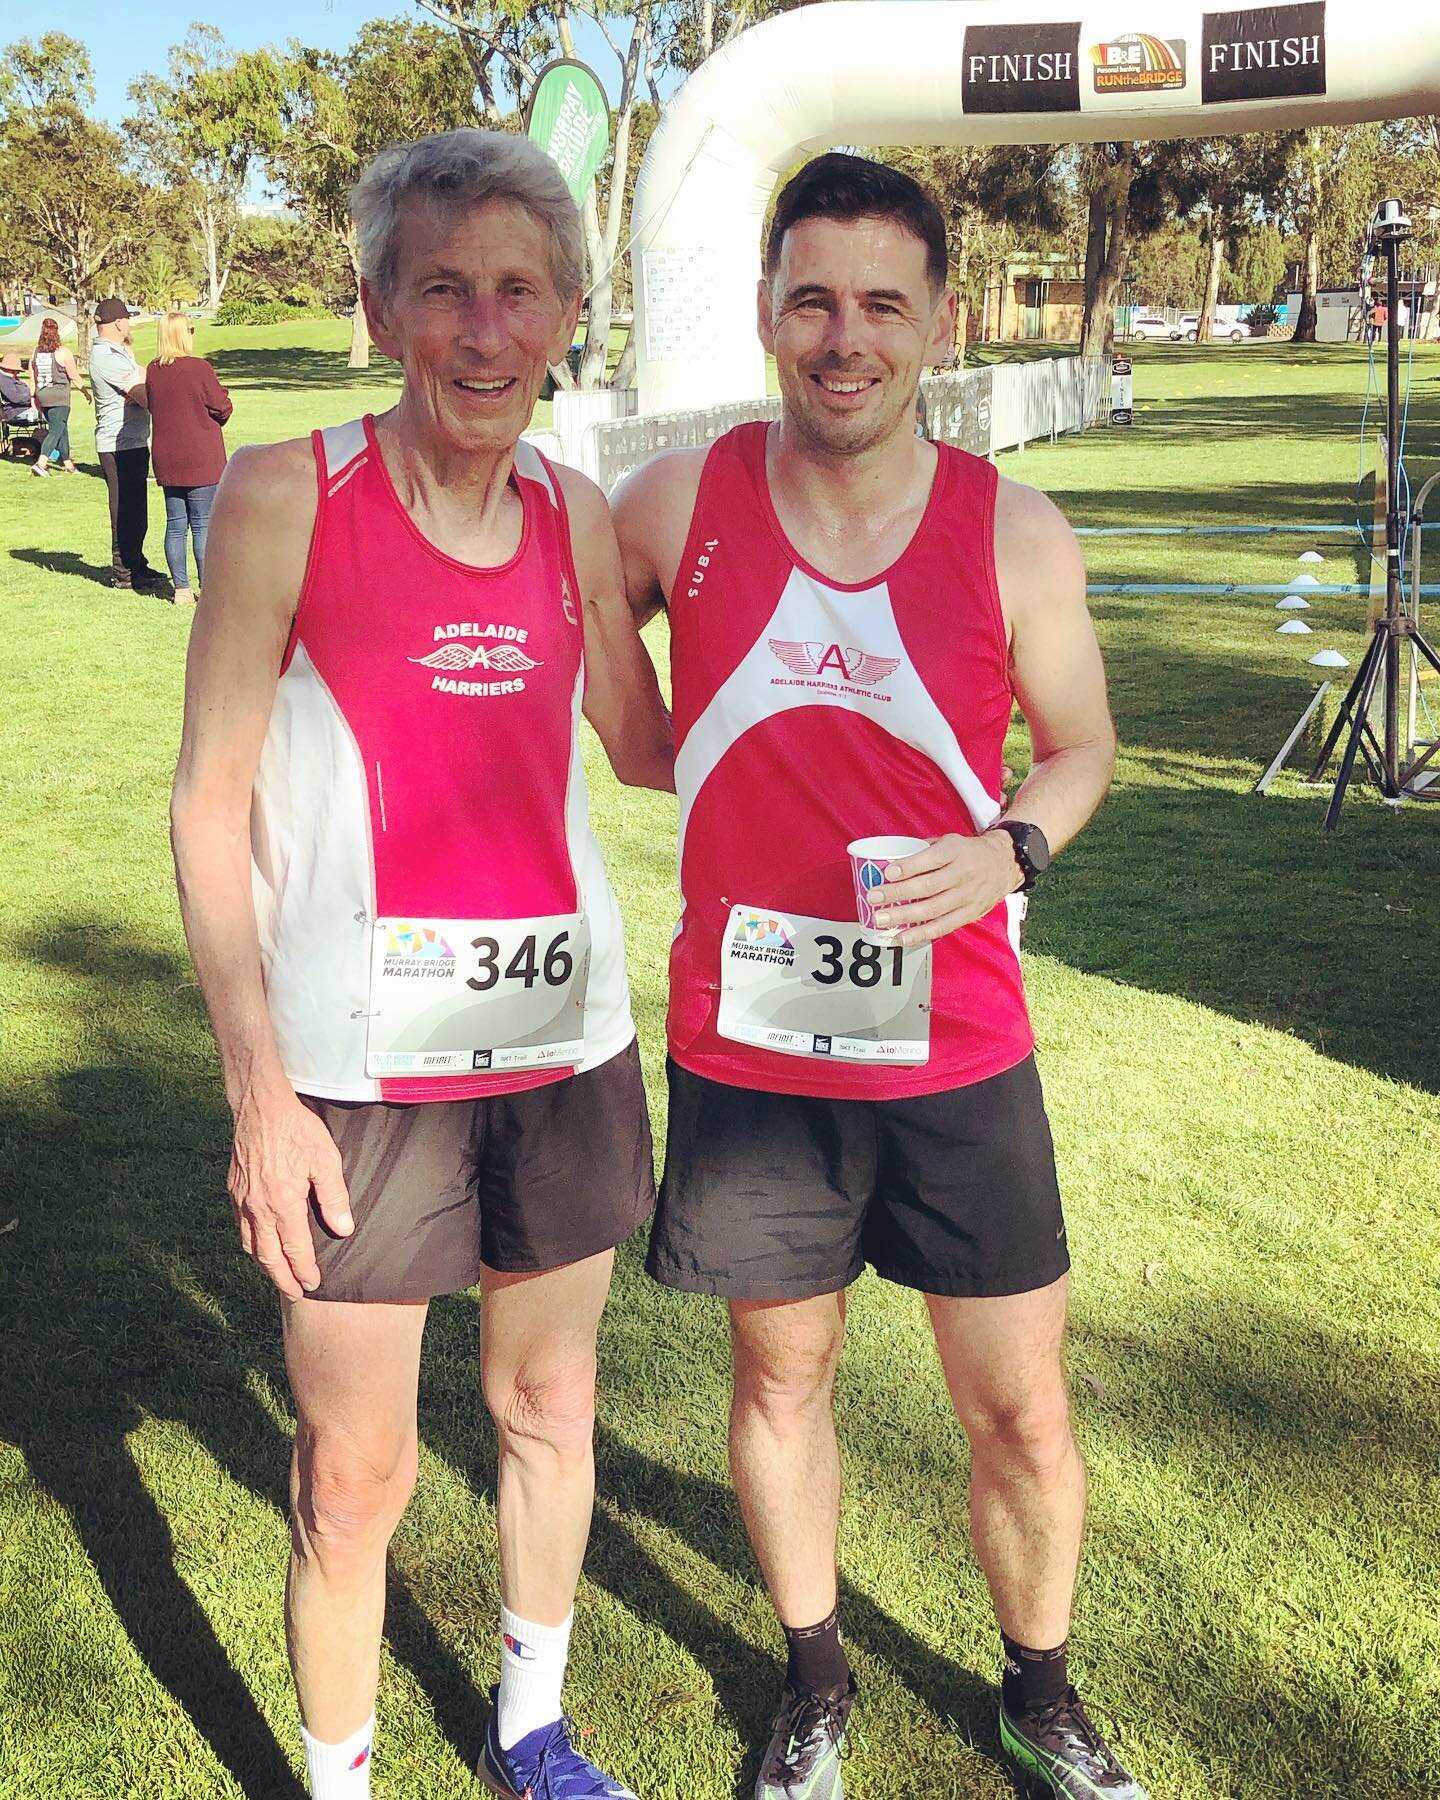 How&rsquo;s this father + son duo who ran the 10km today!! Rhys and his 79-year-old dad run together every weekend ~ and we&rsquo;re so glad they joined us today!! rsandery. 🙌🏃🏾&zwj;♂️🏃🏾&zwj;♂️

#neverstoprunning #runners #murraybridge #murraybr